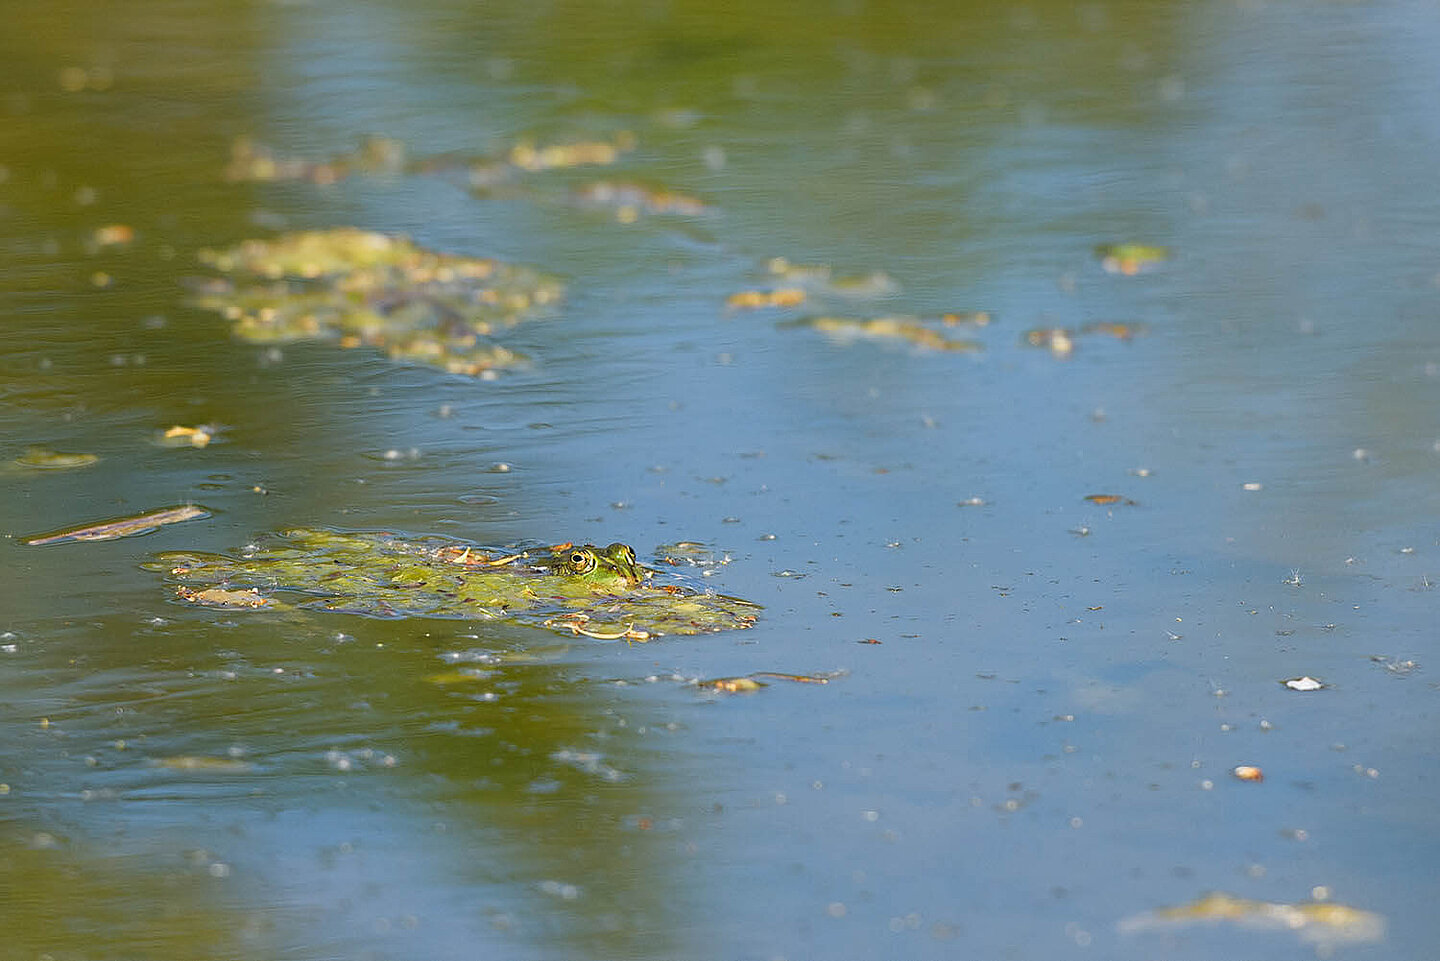 a frog hides in the algae floating on the surface of the pond